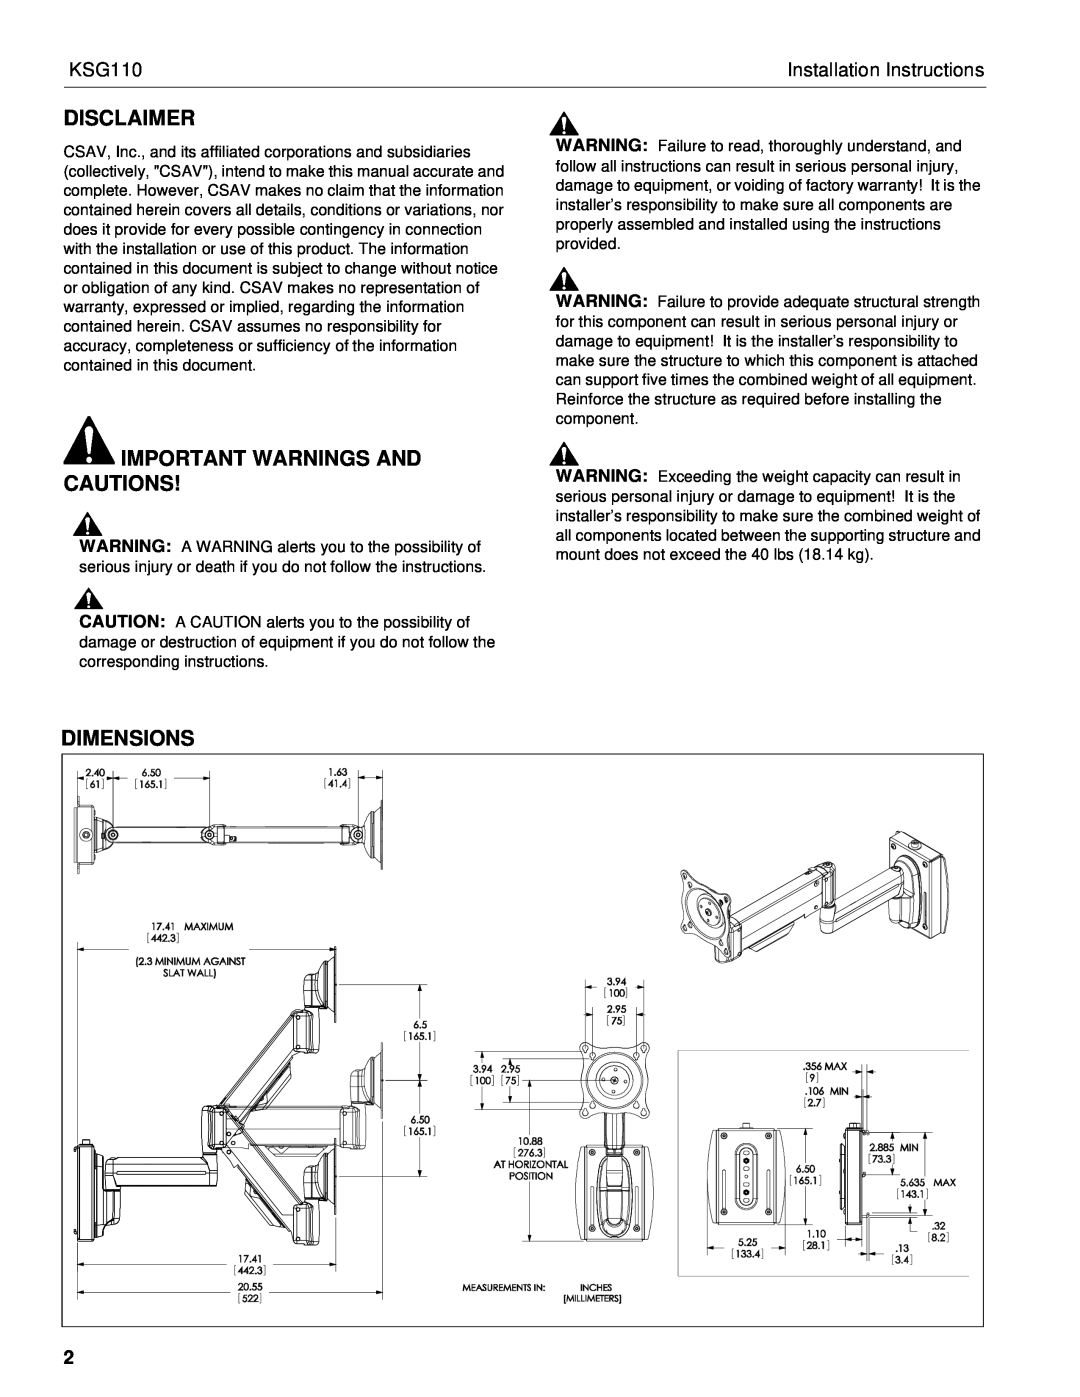 Chief Manufacturing KSG110 Disclaimer, Important Warnings And Cautions, Installation Instructions, Dimensions 